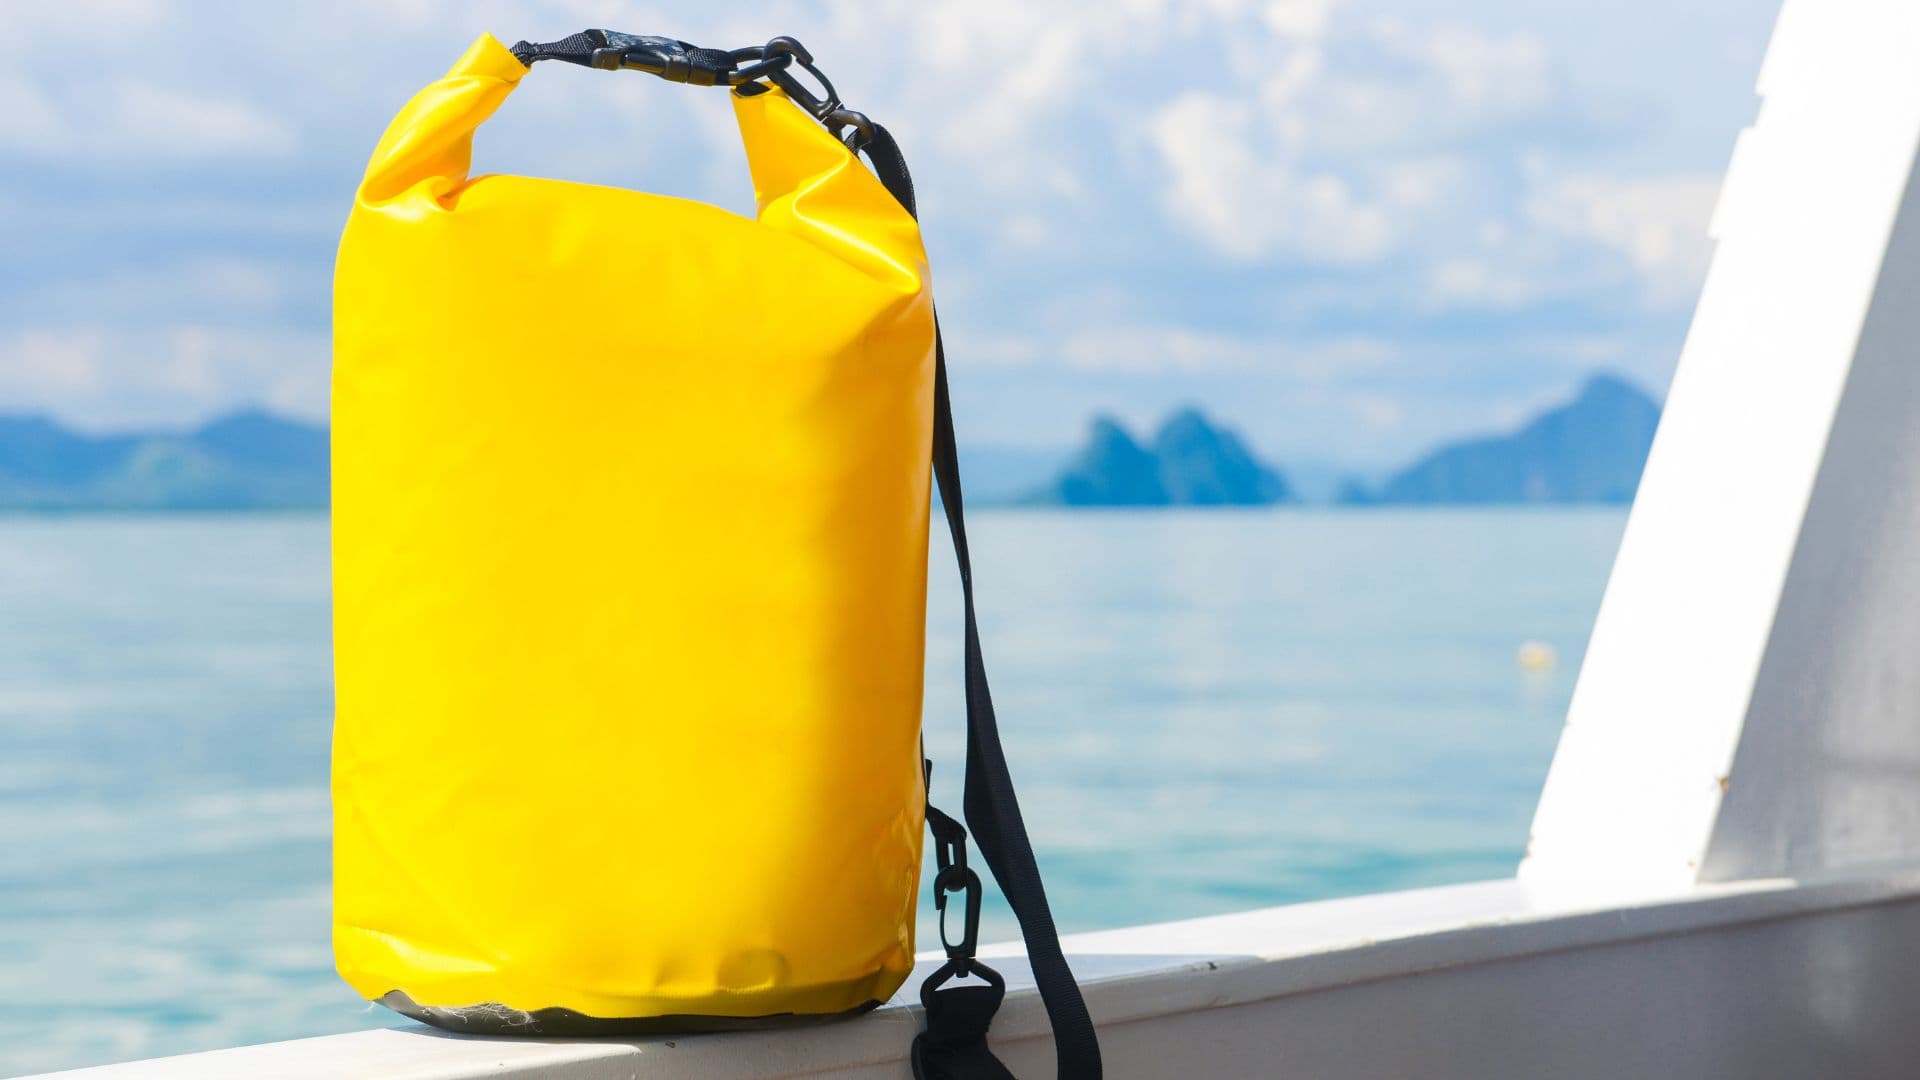 An image of a yellow waterproof bag on a boat. 